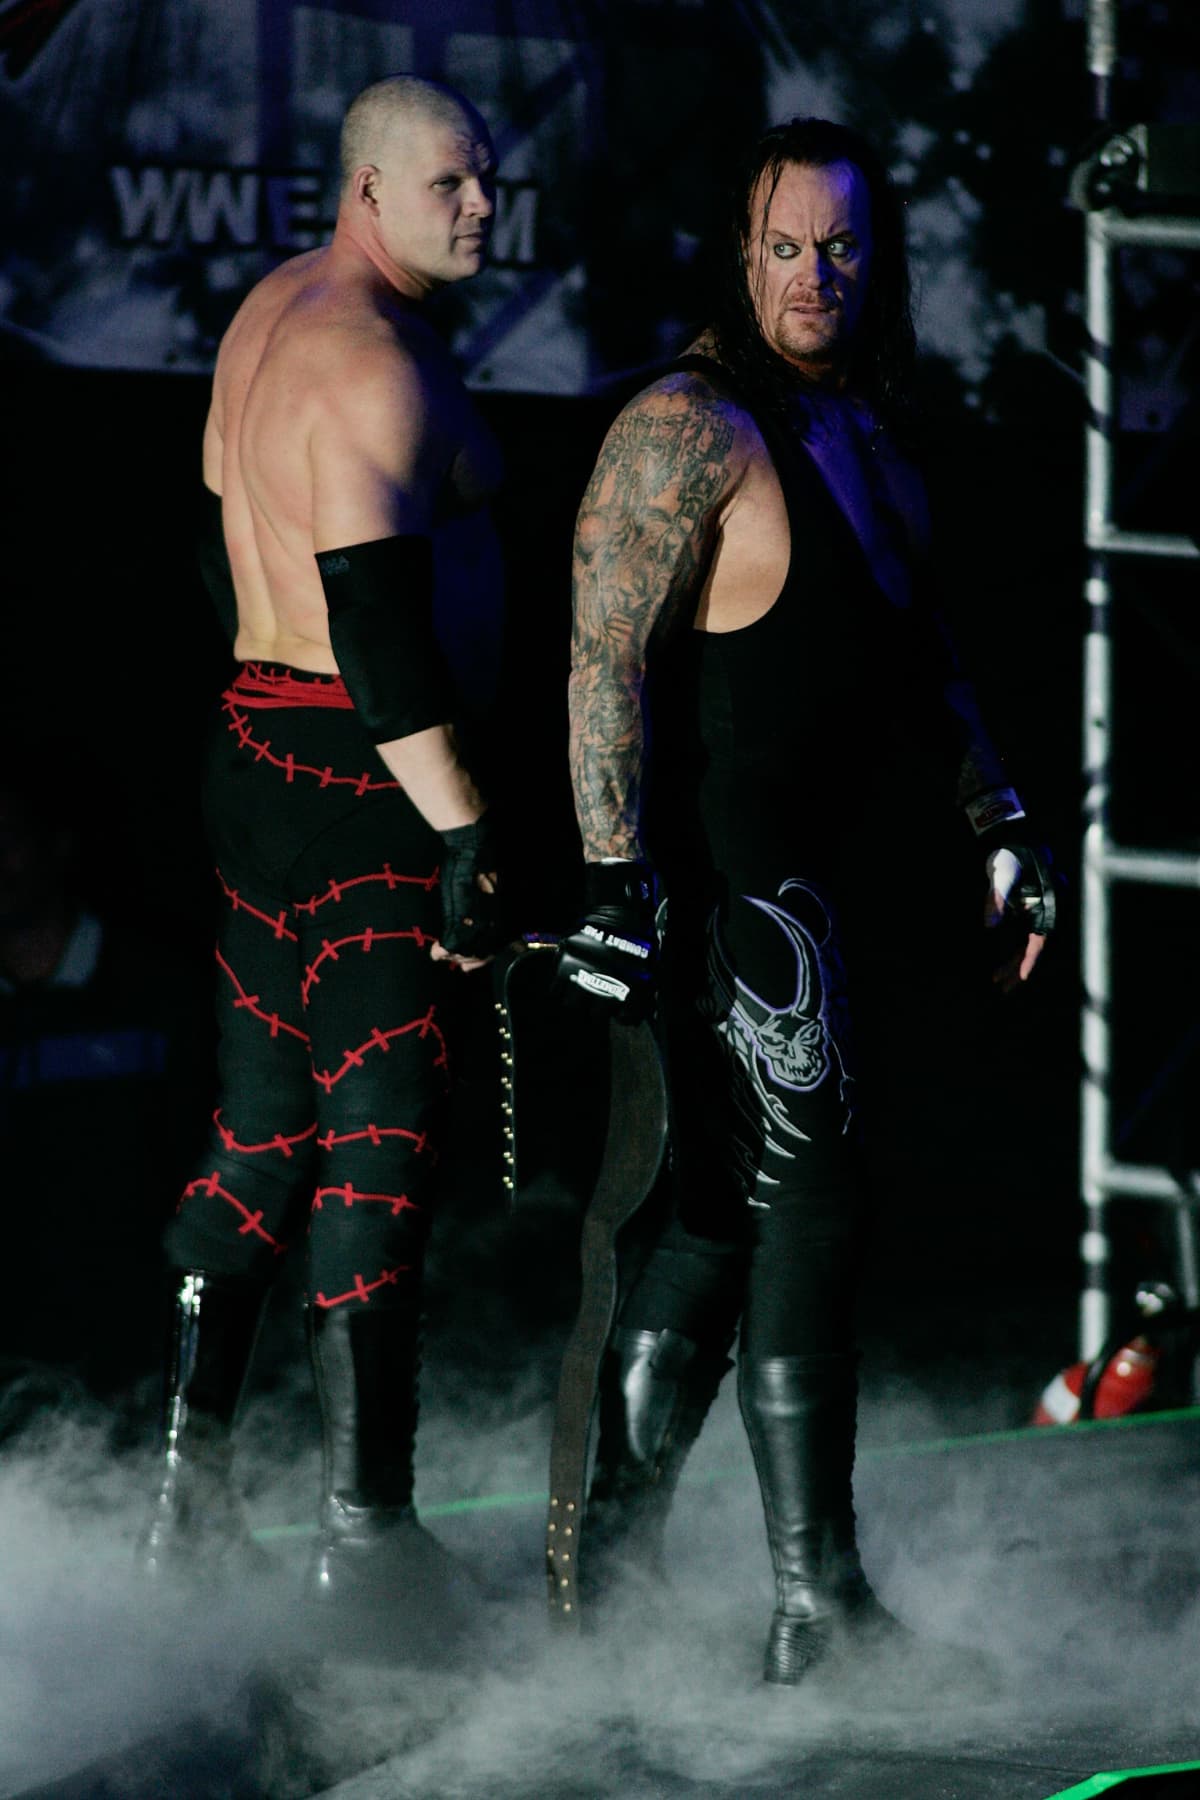 GUADALAJARA, MEXICO - FEBRUARY 14: Wrestling fighters Kane and  Fight Undertaker during the WWE Smackdown wrestling function at Plaza Vicente Fernandez on February 14, 2010 in Guadalajara, Mexico. (Photo by Gerardo Zavala/Jam Media/LatinContent via Getty Images)